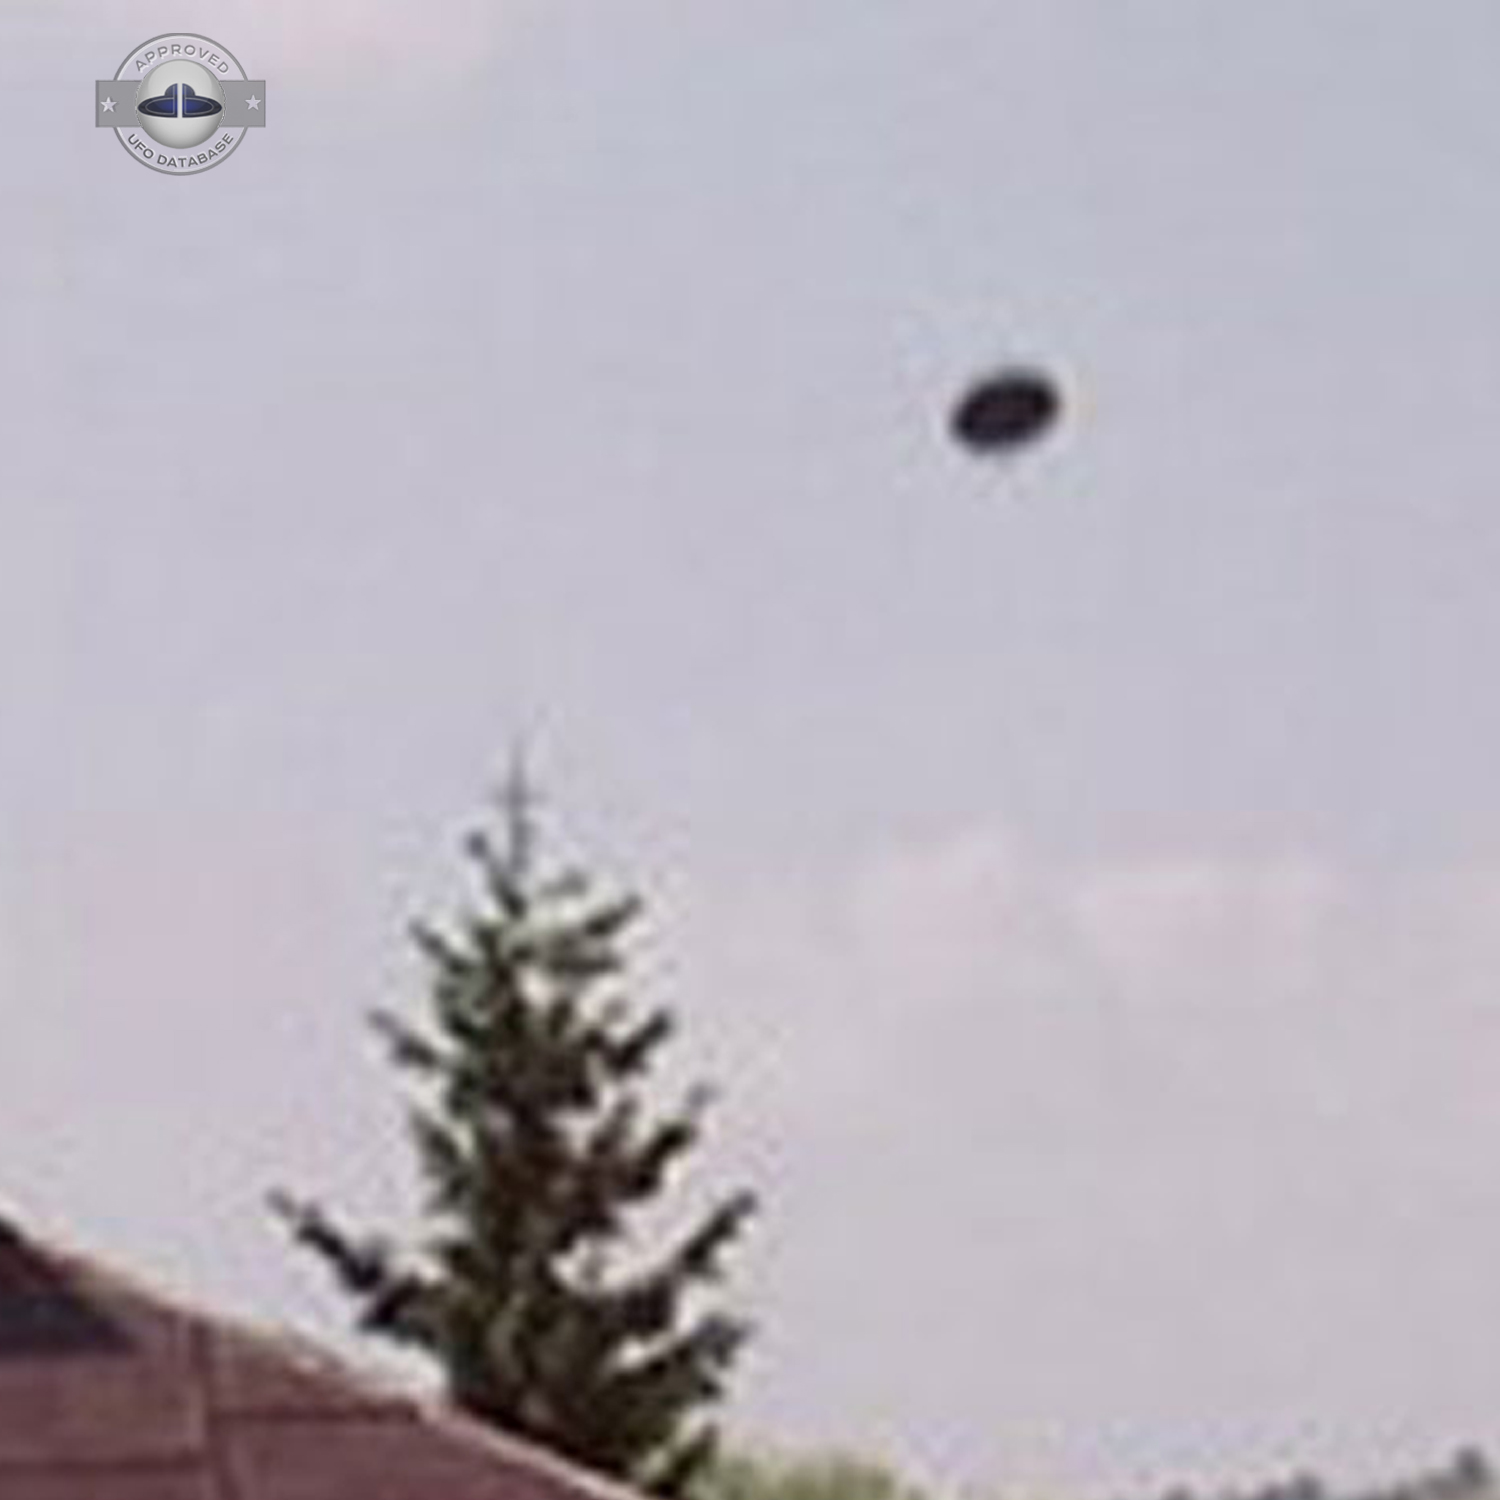 UFO was previously seen in city of Skurowa at a very high altitude UFO Picture #89-4